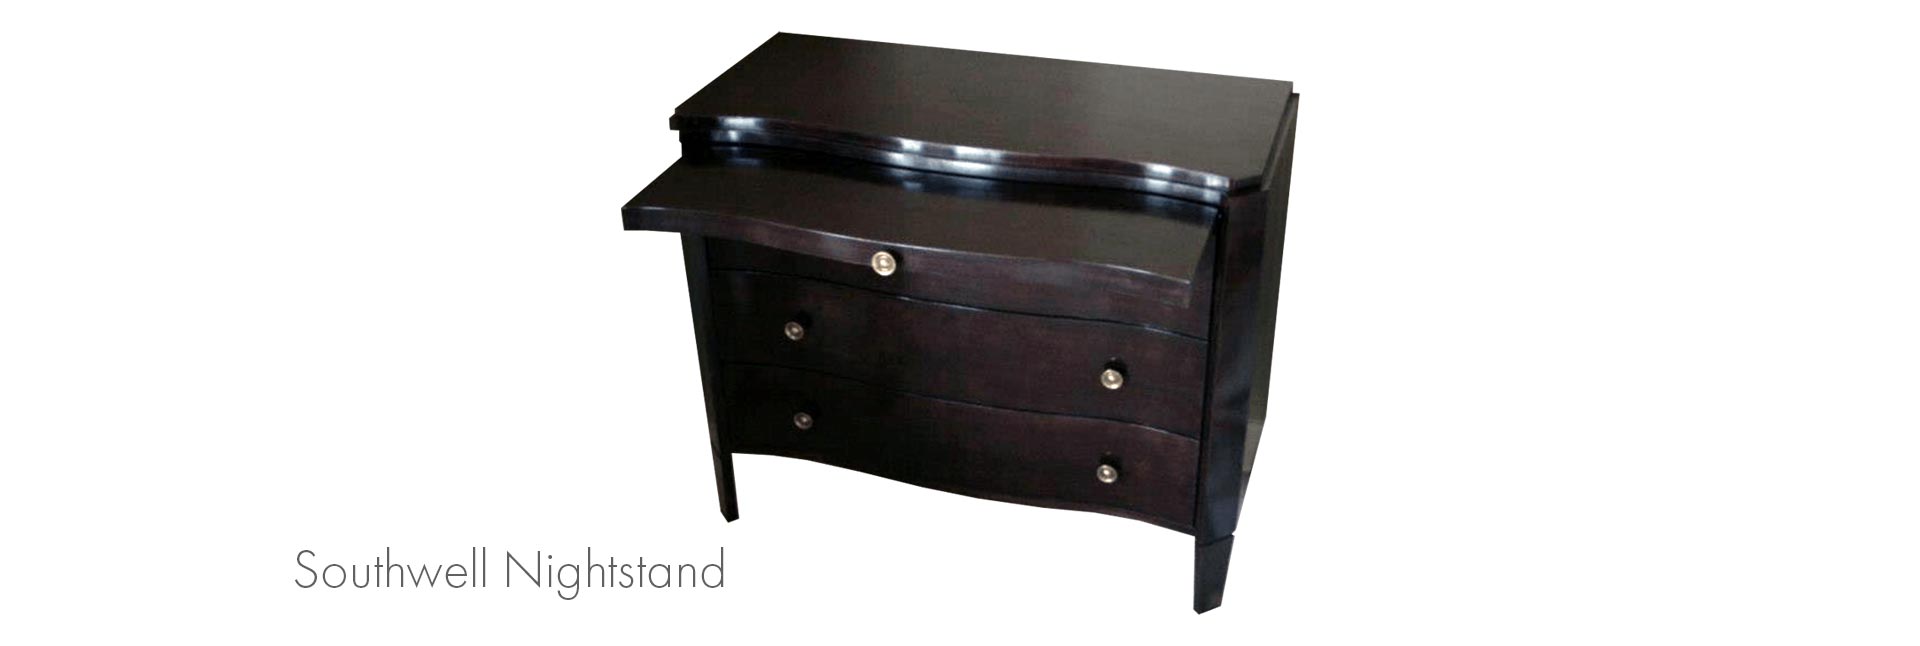 Southwell-Nightstand-Featured